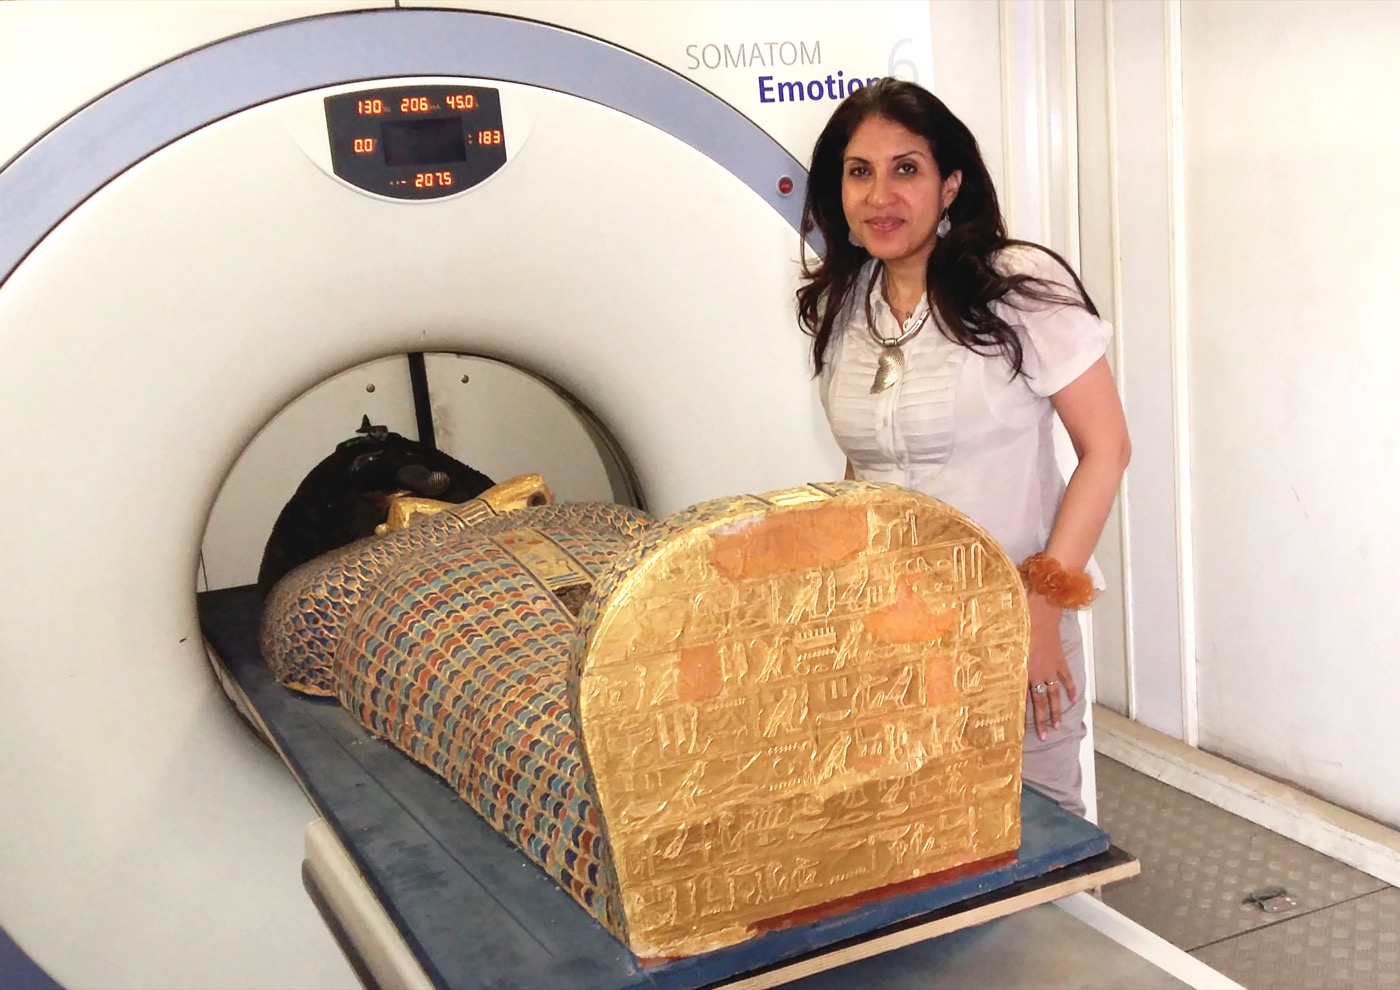 an Egyptian woman stands next to a CT scanner, which has an ornately decorated sarcophagus on its bed